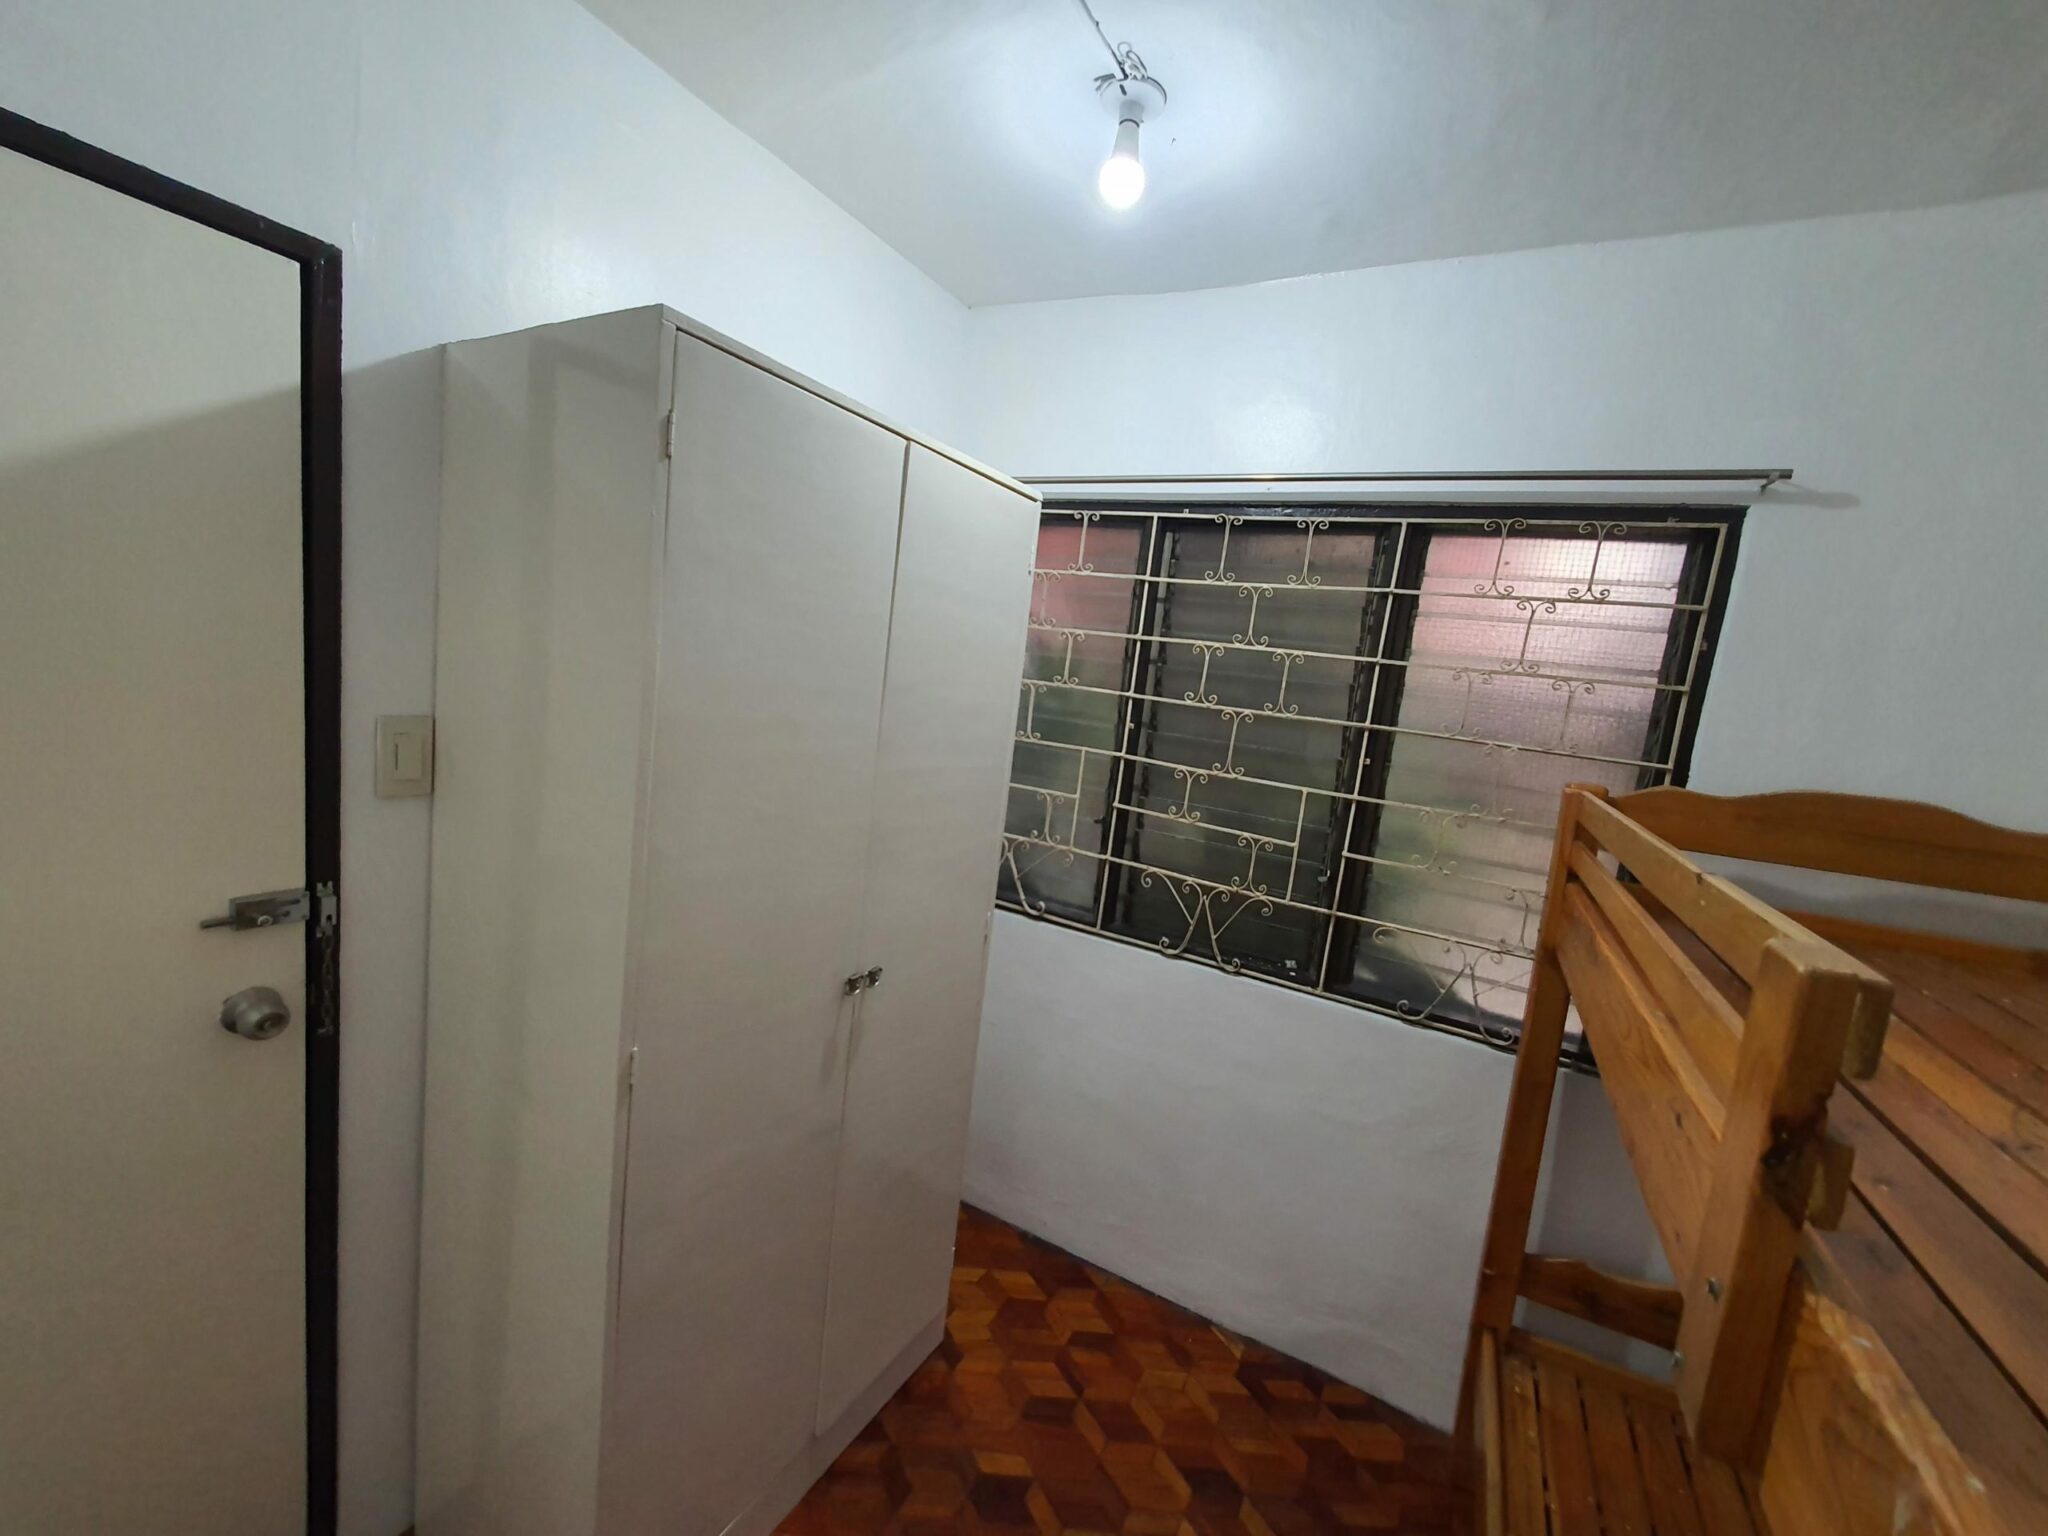 Room for Rent in Makati Guadalupe Bliss